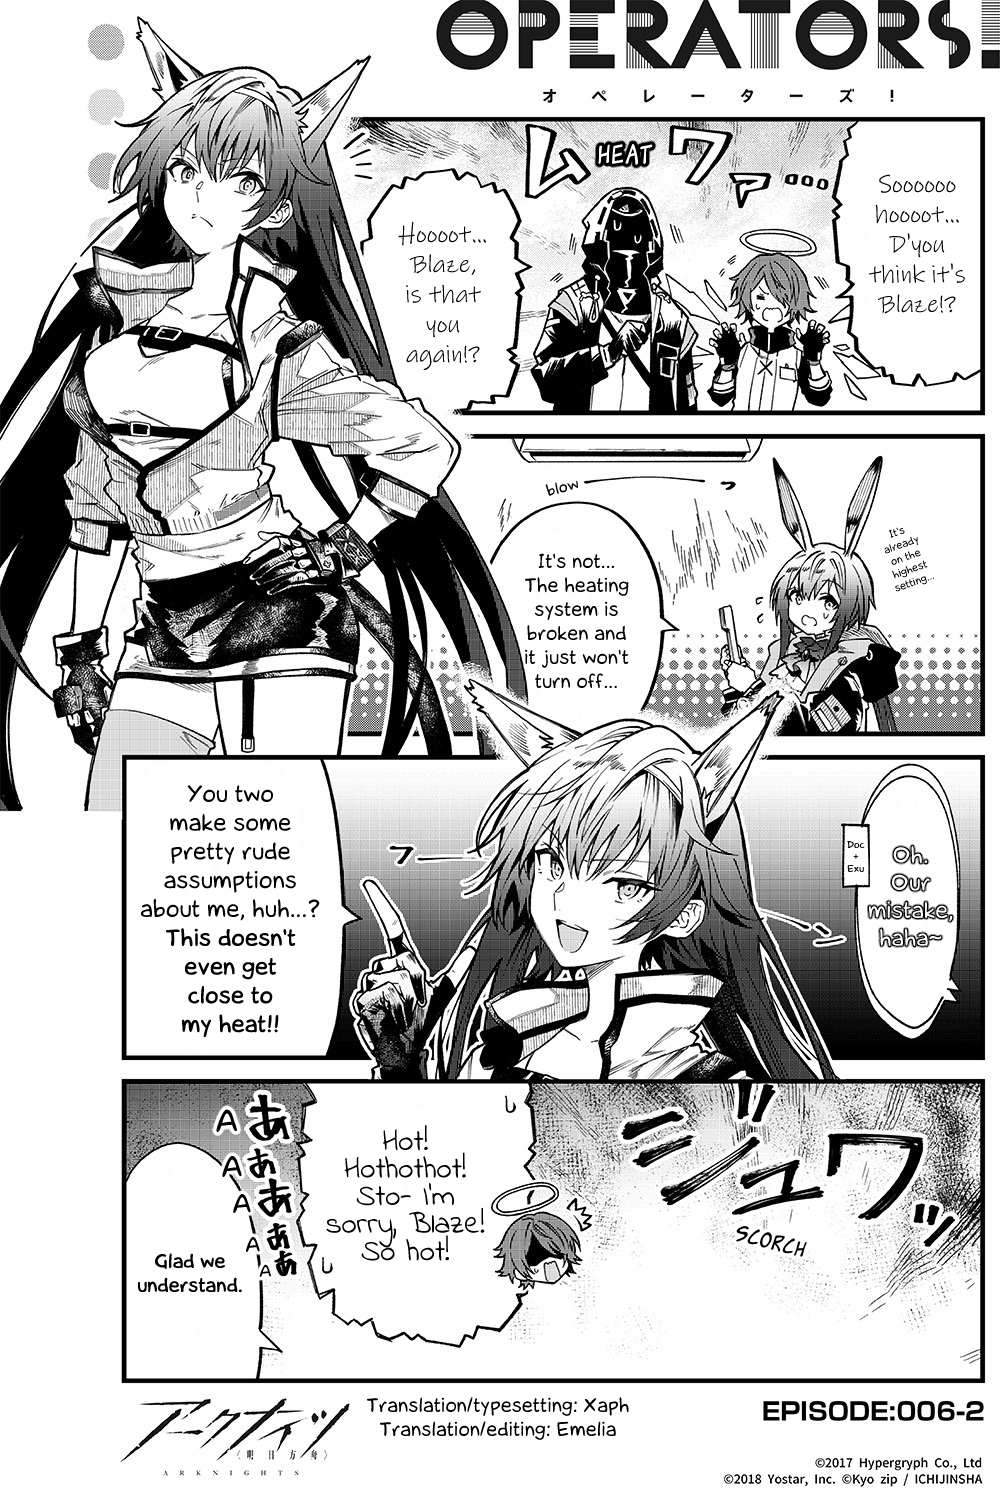 Arknights: Operators! Chapter 6.2 #1